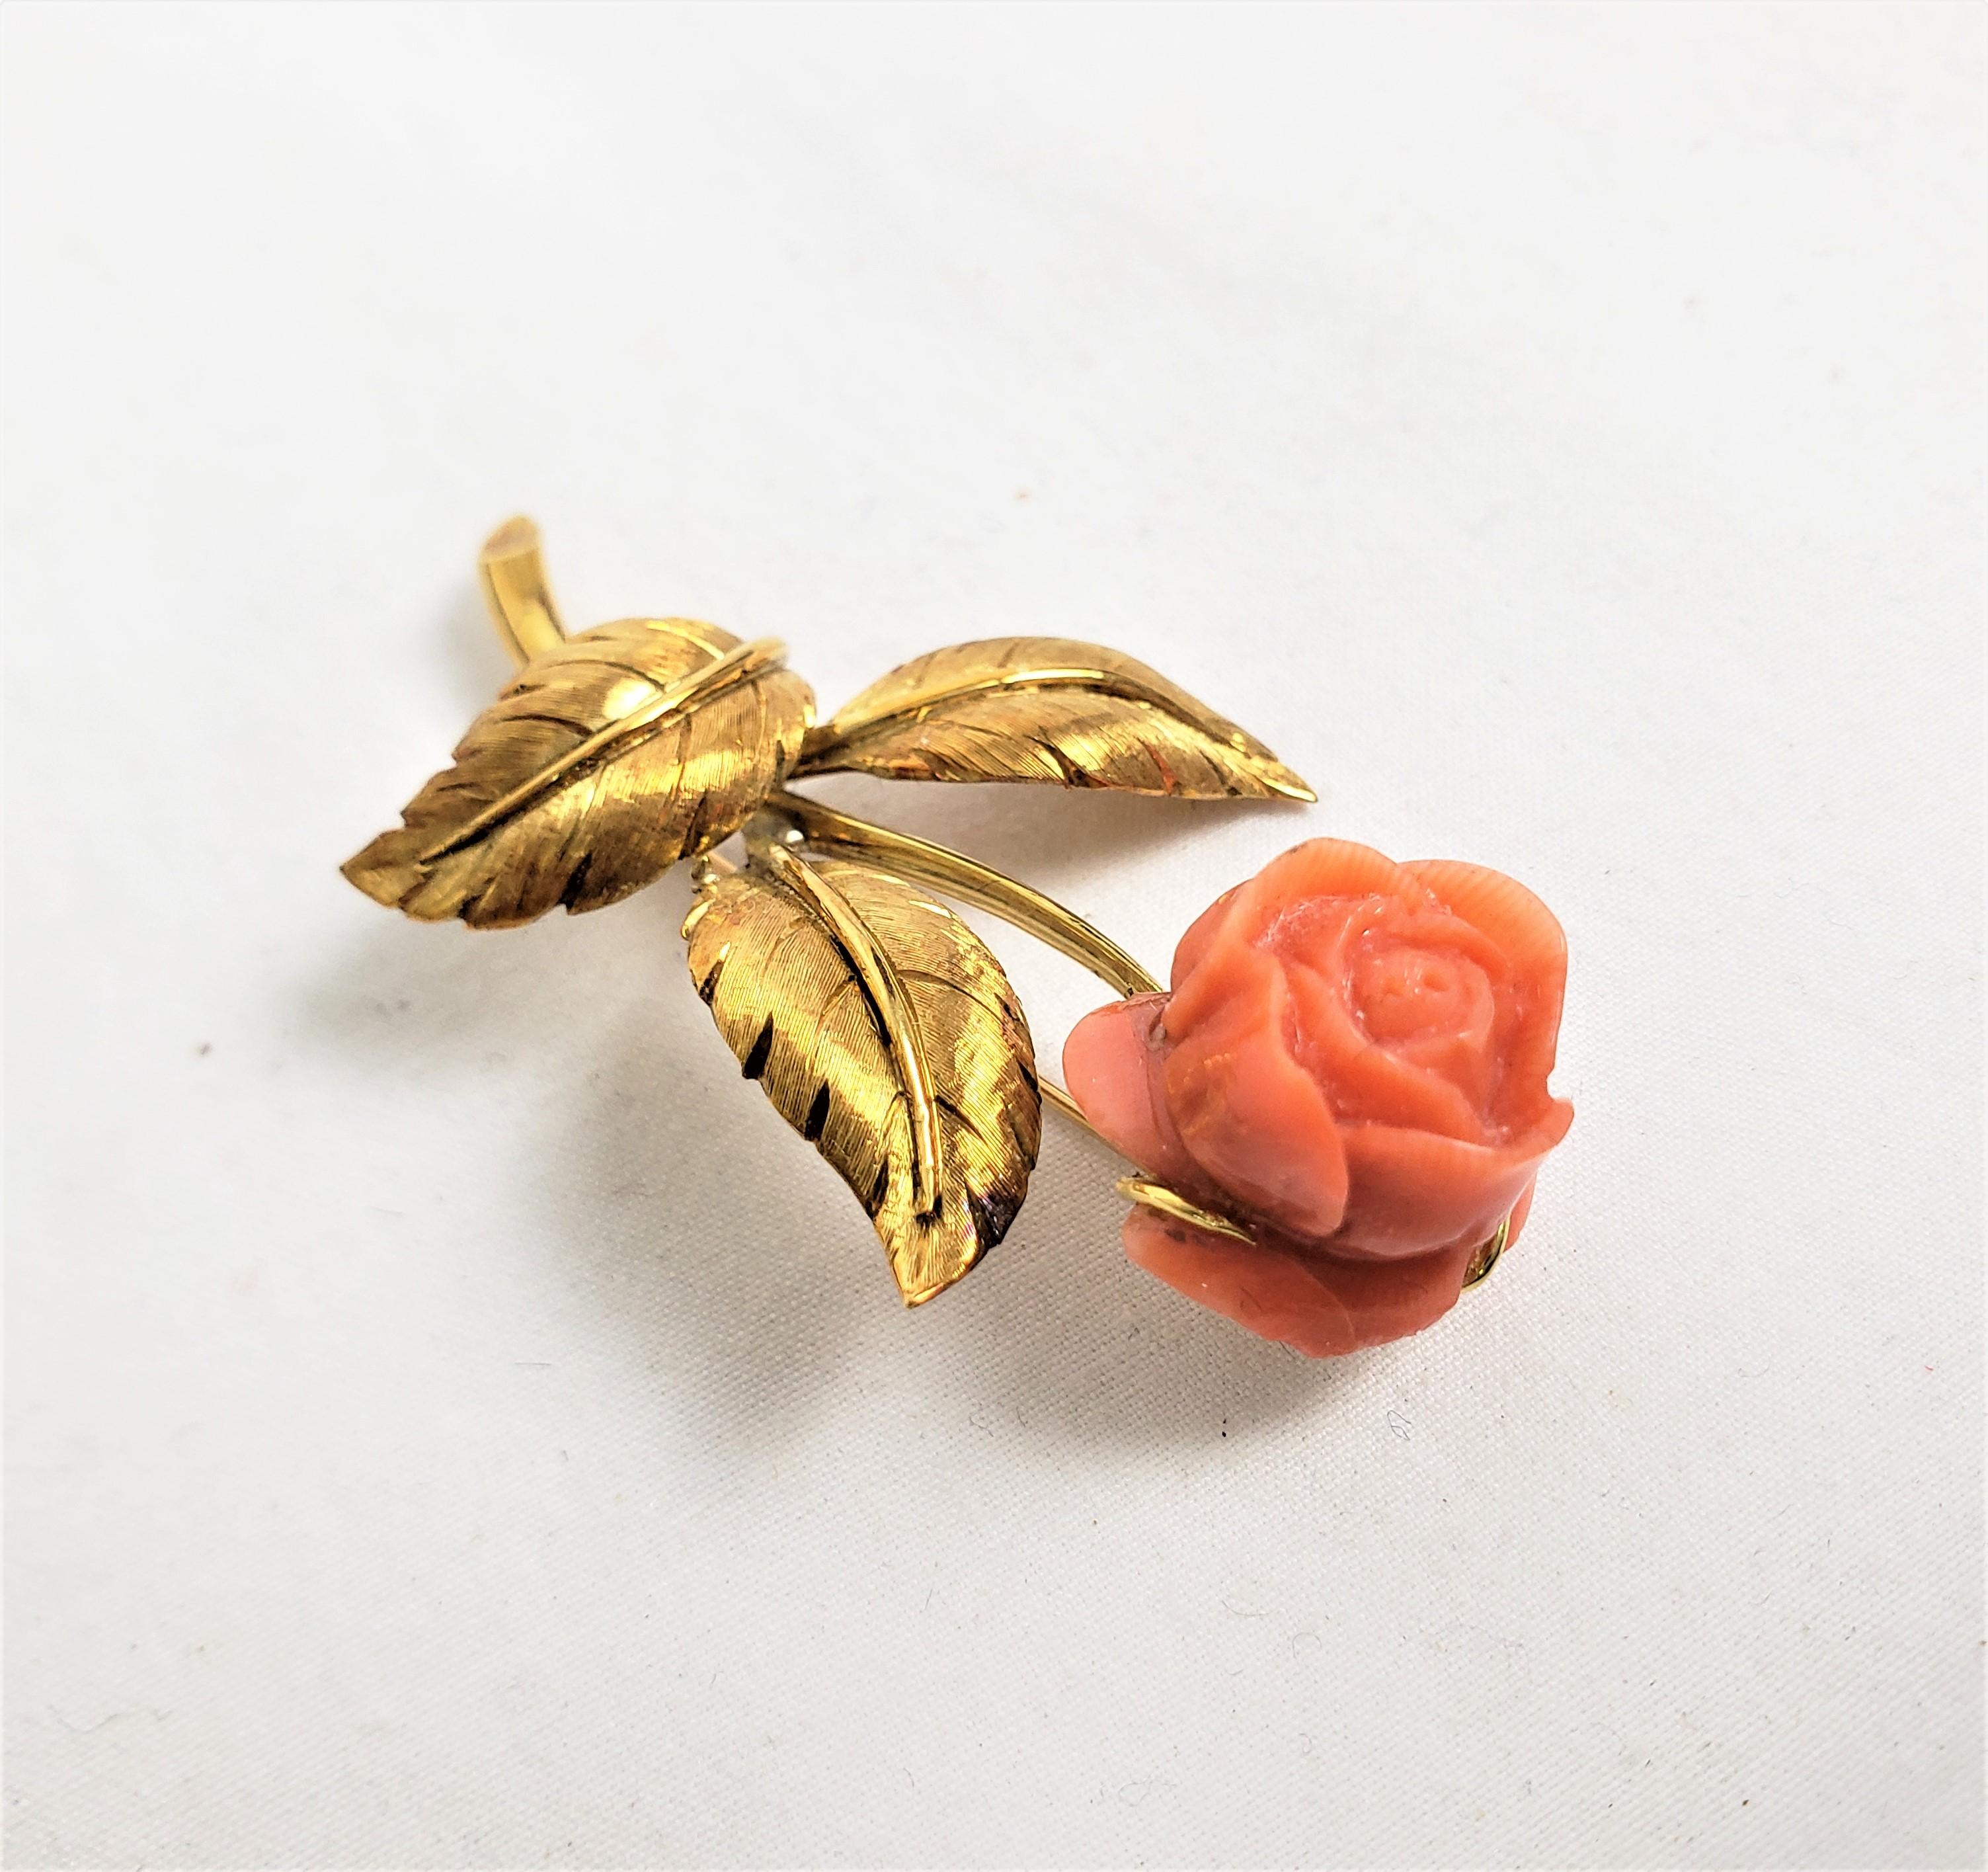 Tiffany 18 Karat Gold & Carved Coral Brooch with Matching 14 Karat Earrings Set In Good Condition For Sale In Hamilton, Ontario